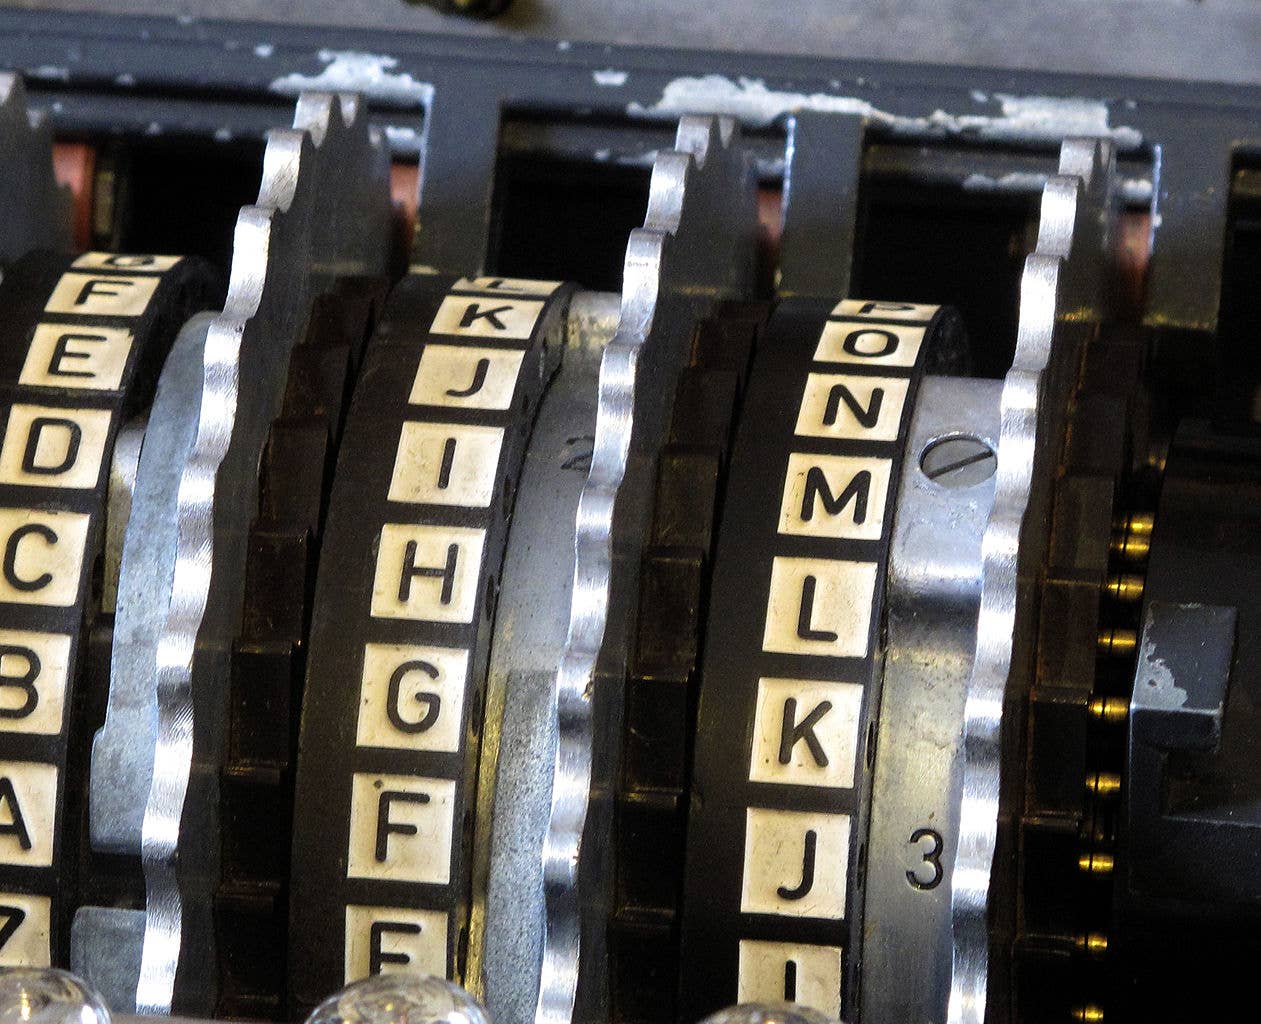  Enigma wheels within alphabet rings in position in an Enigma scrambler. (Wikipedia)